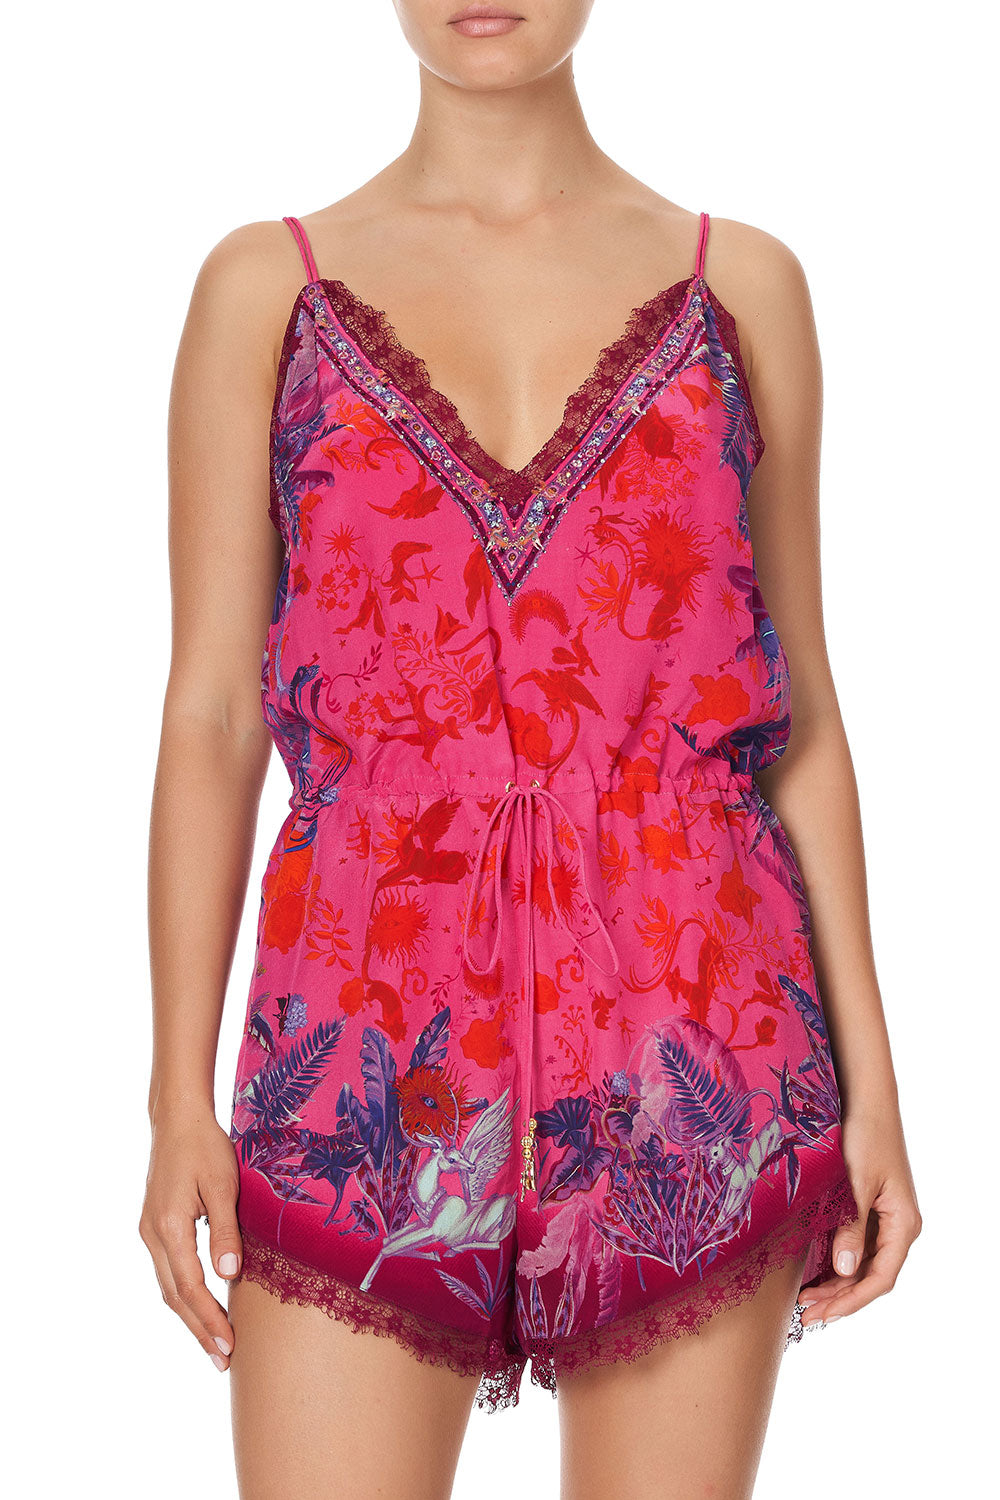 V-NECK LACE PLAYSUIT TROPIC OF NEON